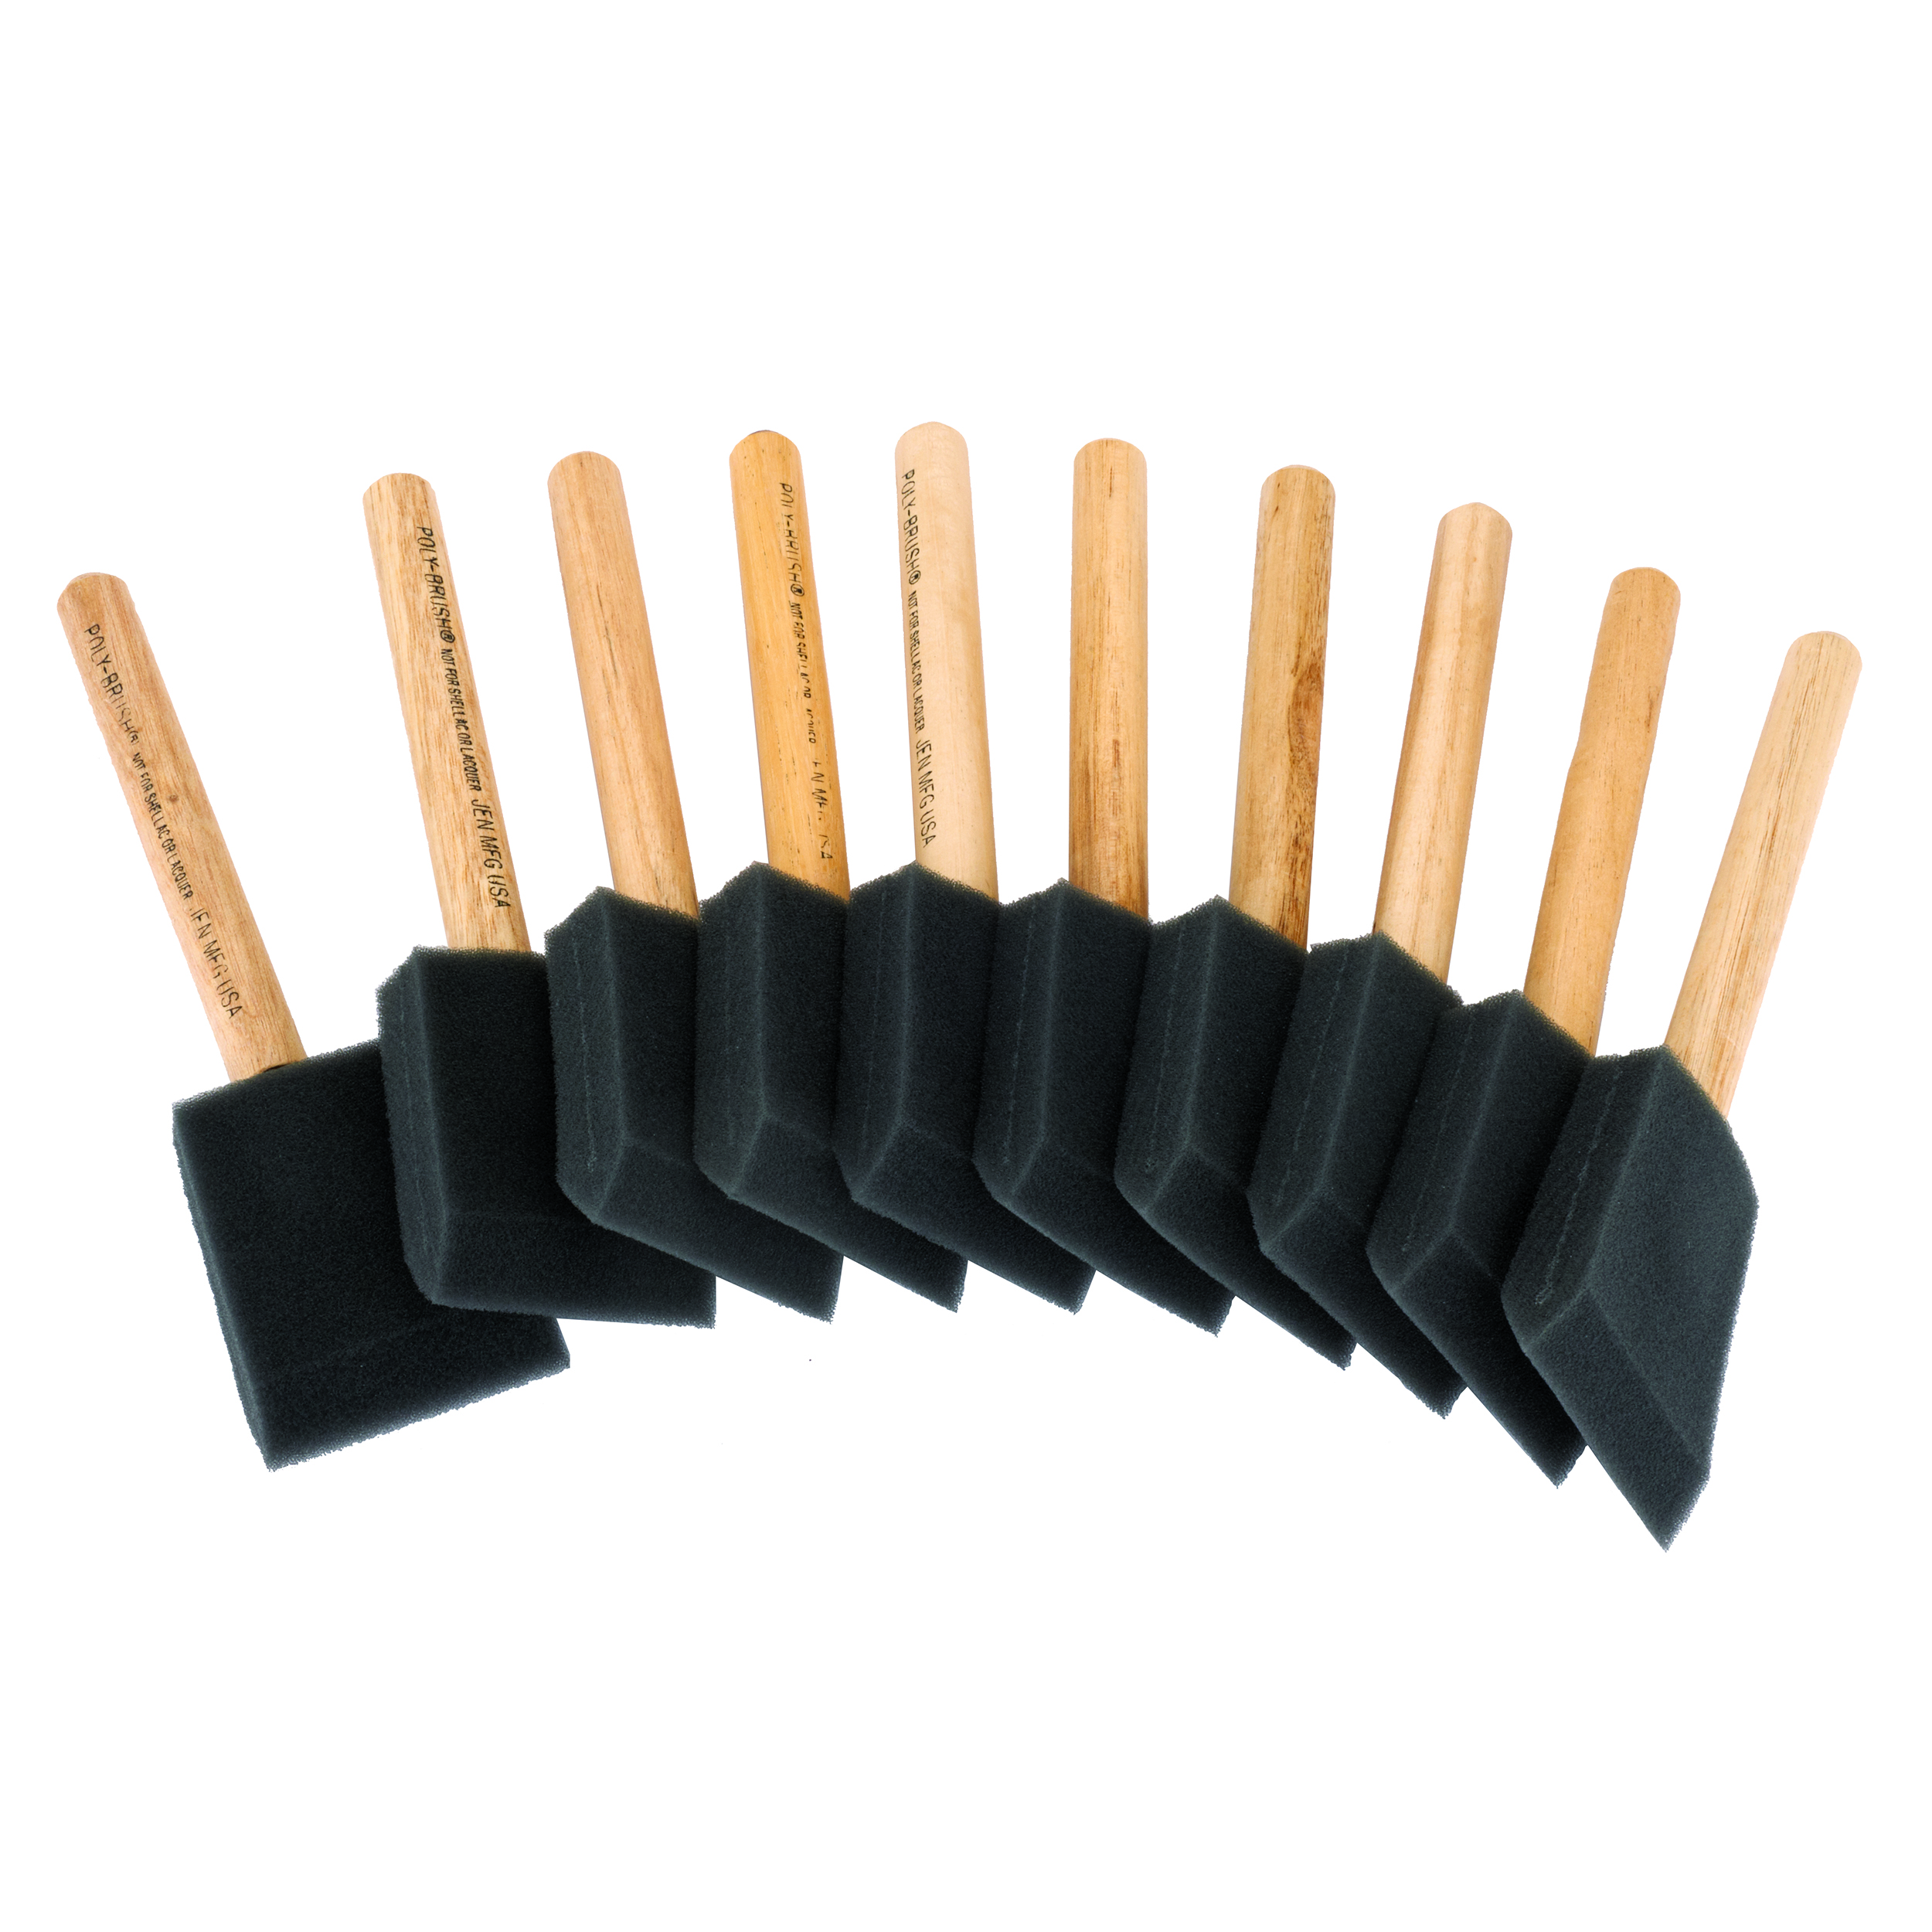 2" Wooden Handle Foam Brushes, 10-pack